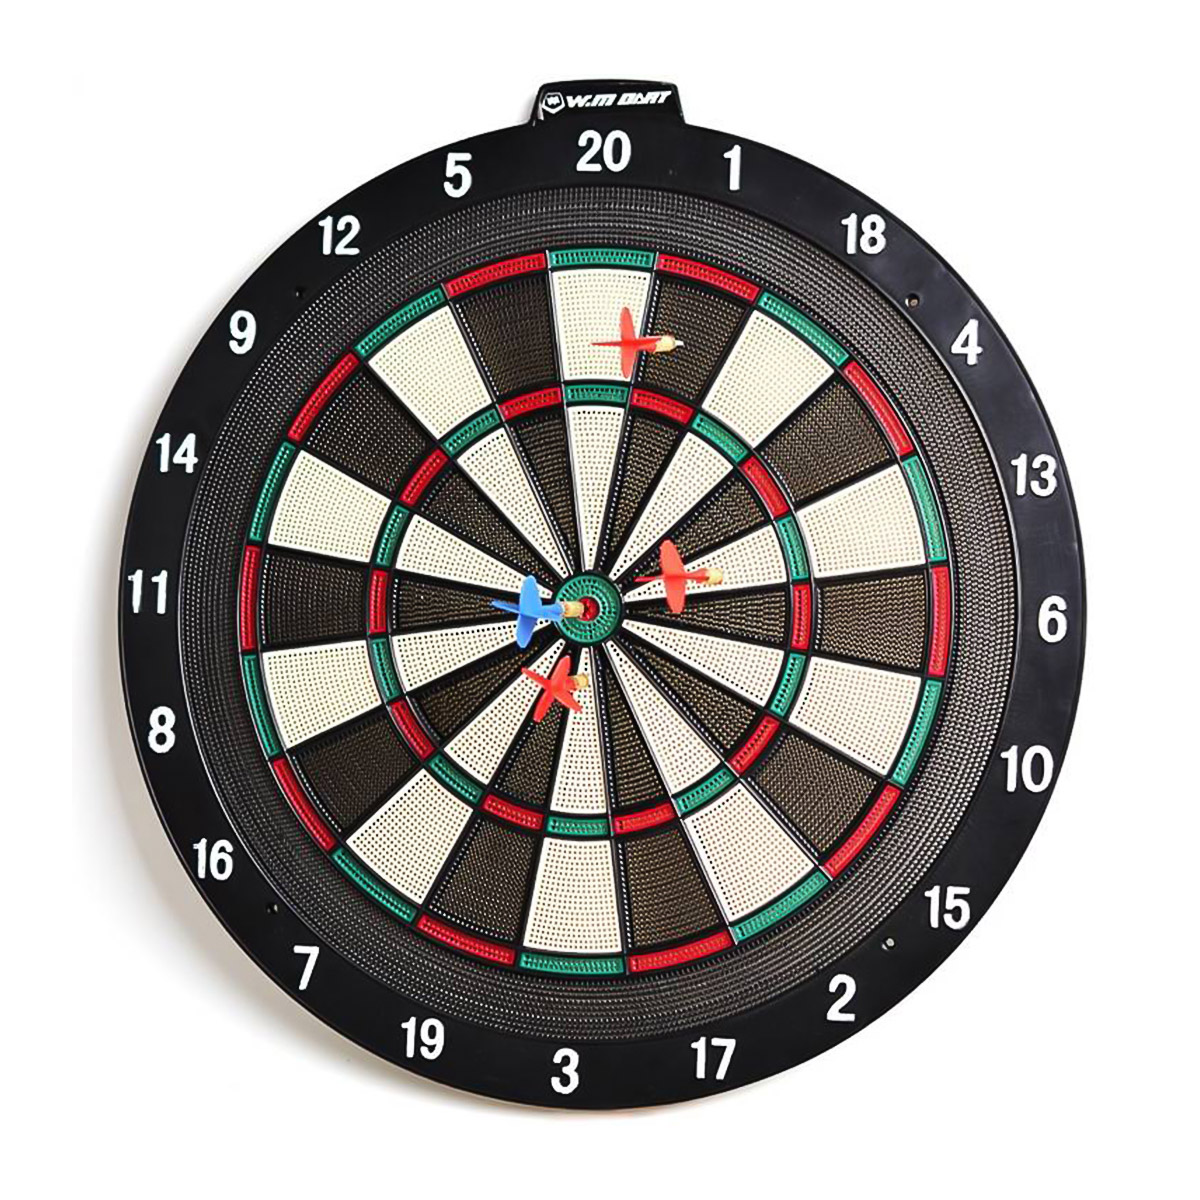 https://www.winmaxdartgame.com/official-18-softip-dartboard-includes-six-soft-tip-darts-and-six-replacement-tips-win-max-3-product/